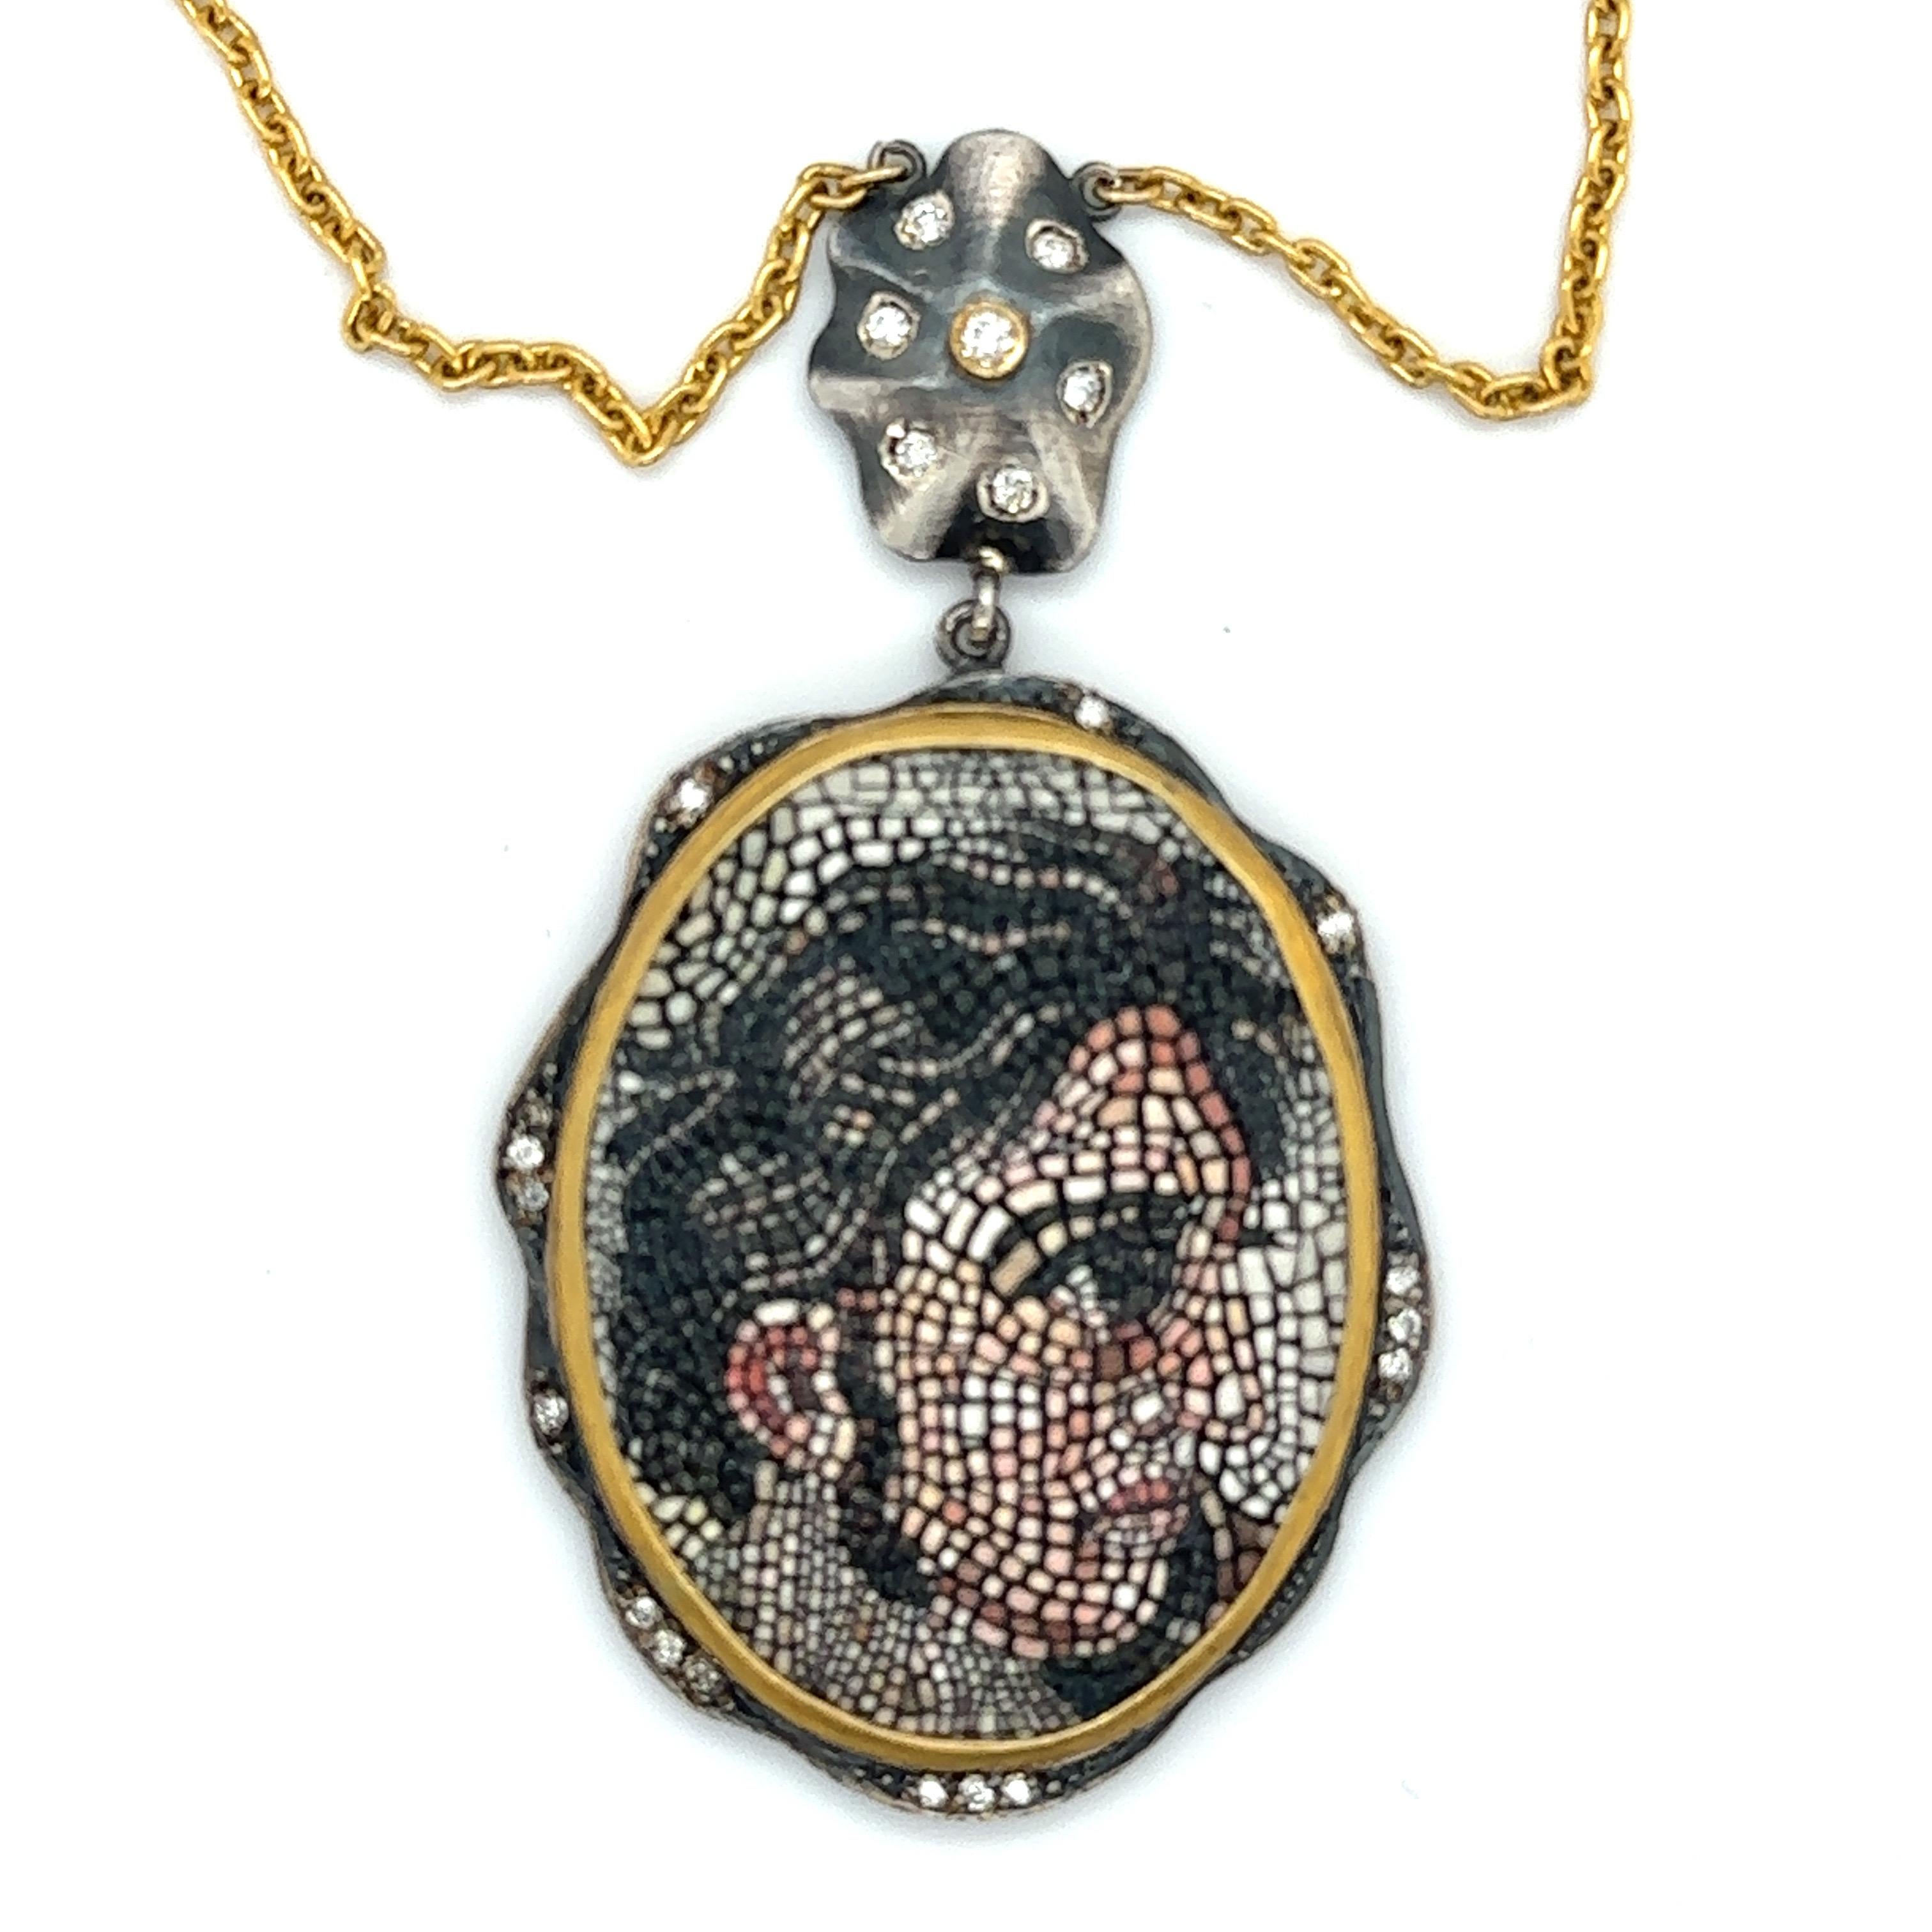 24KT GOLD/SS MOSAIC PENDANT with DIAMONDS 
Metal: 24K GOLD/OXIDIZED SS
Diamond Info: H/I COLOR SI1/2 ROUND BRILLIANT DIAMONDS 0.20CT
Total Ct Weight: 0.20 cwt.
Item Weight:  21 gm
Necklace Size: 16+2 = 18”
Measurements:  58mm x 32mm
